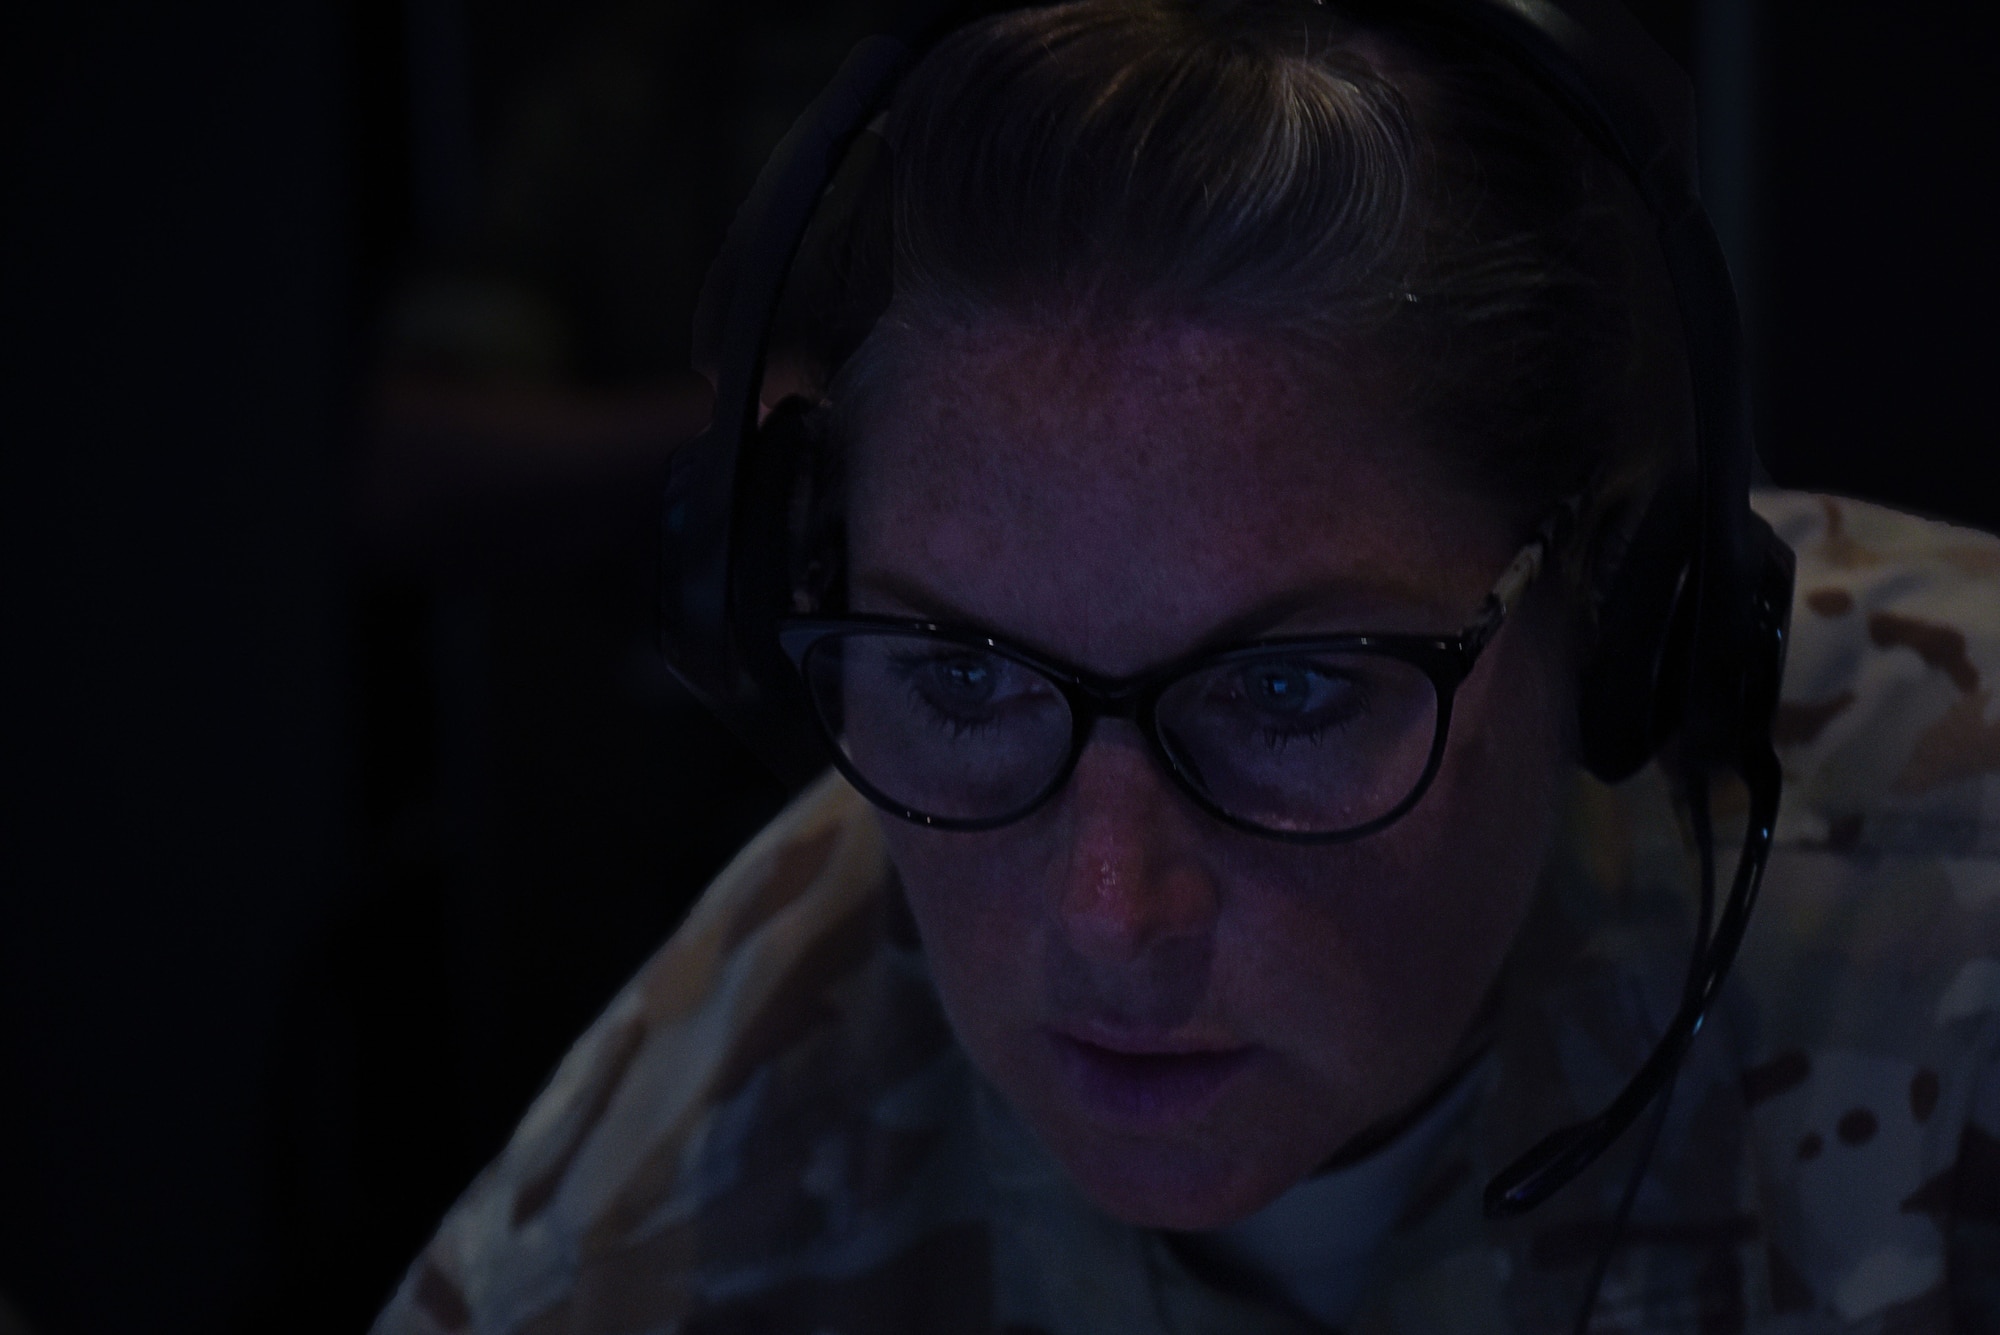 Lt. Col. “Spaz” Sposito-Salceies, 505th Test Squadron (TS) commander, stands behind her desk July 26, 2019, at Nellis Air Force Base, Nev.